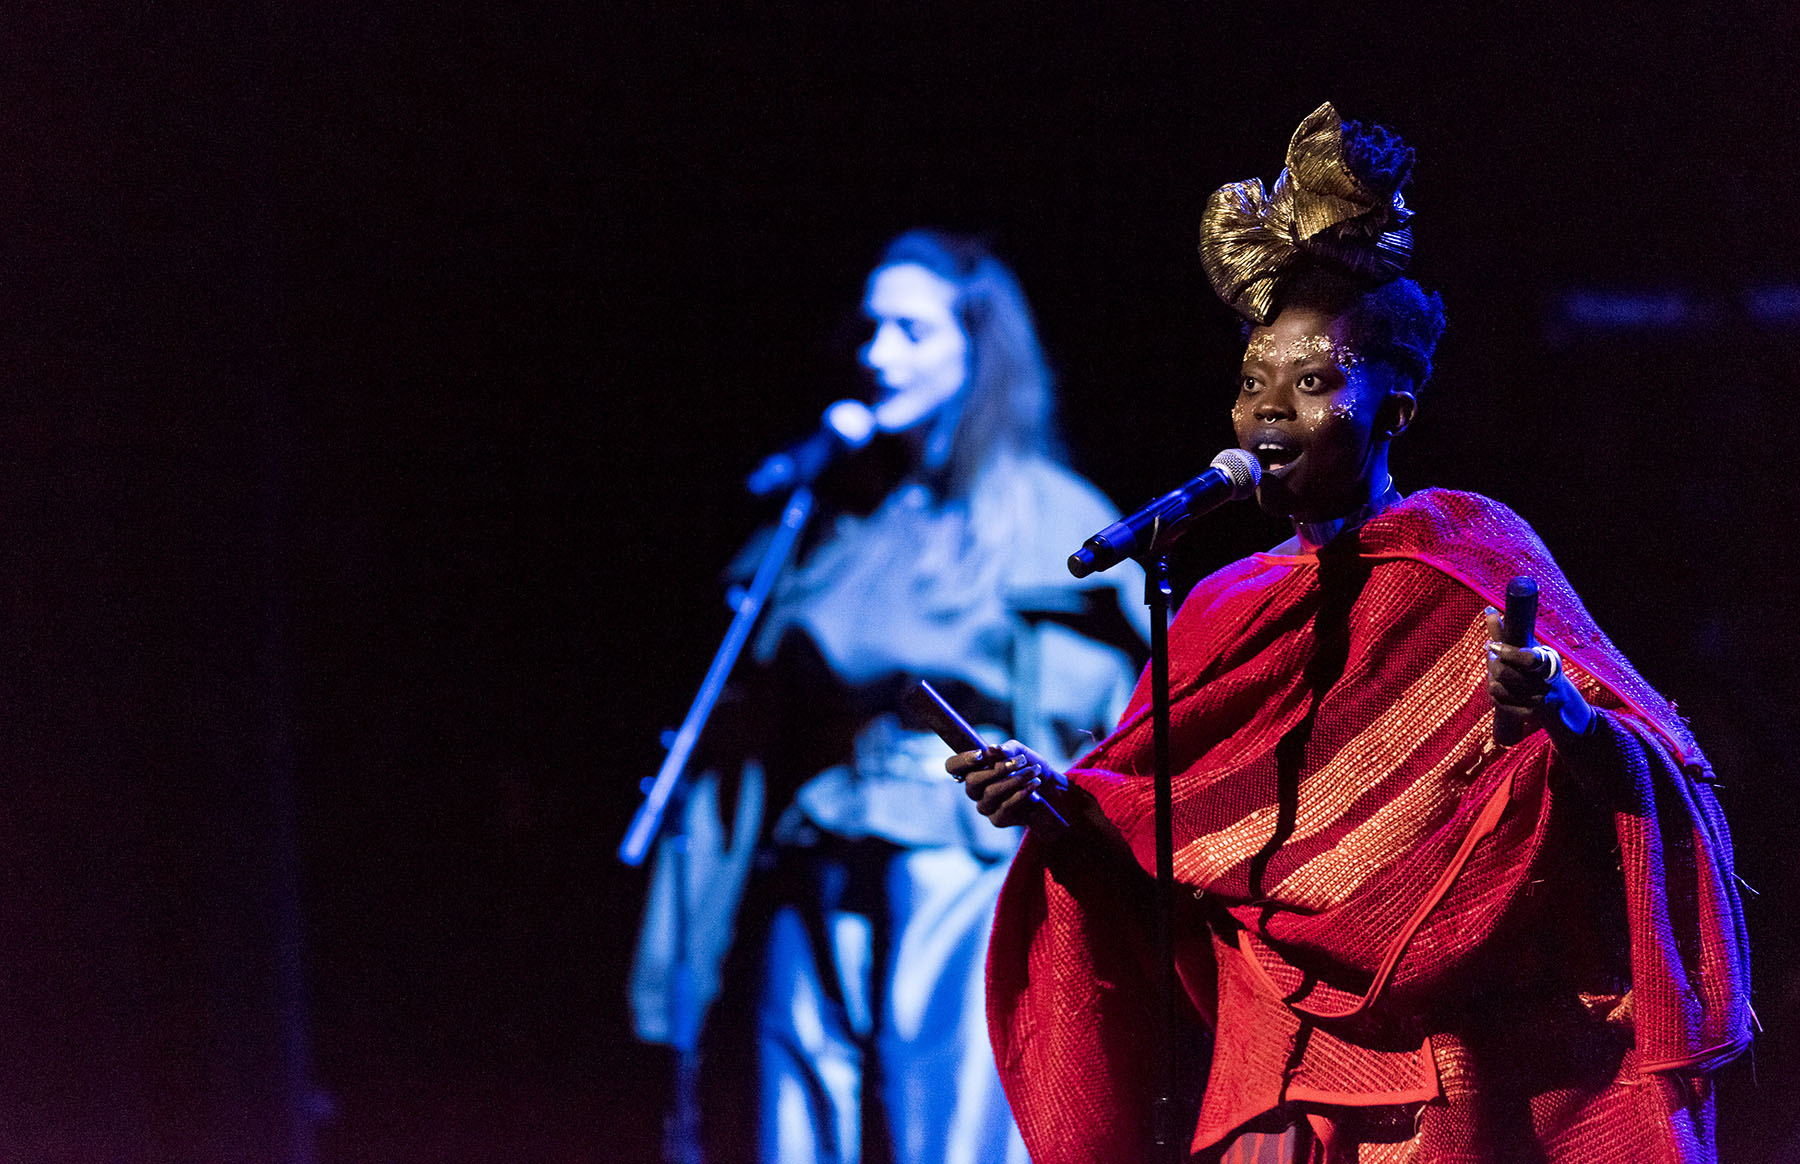 Ghanaian afrobeat and jazz singer-songwriter Jojo Abot performs with her band with backup vocalist Abbie Richards (left rear) at the fourth annual 'Africa Now!' presented by the Apollo Theater and World Music Institute at the Apollo Theater, New York, New York, Saturday, March 26, 2016. Photograph © 2016 Jack Vartoogian/FrontRowPhotos. All rights reserved.